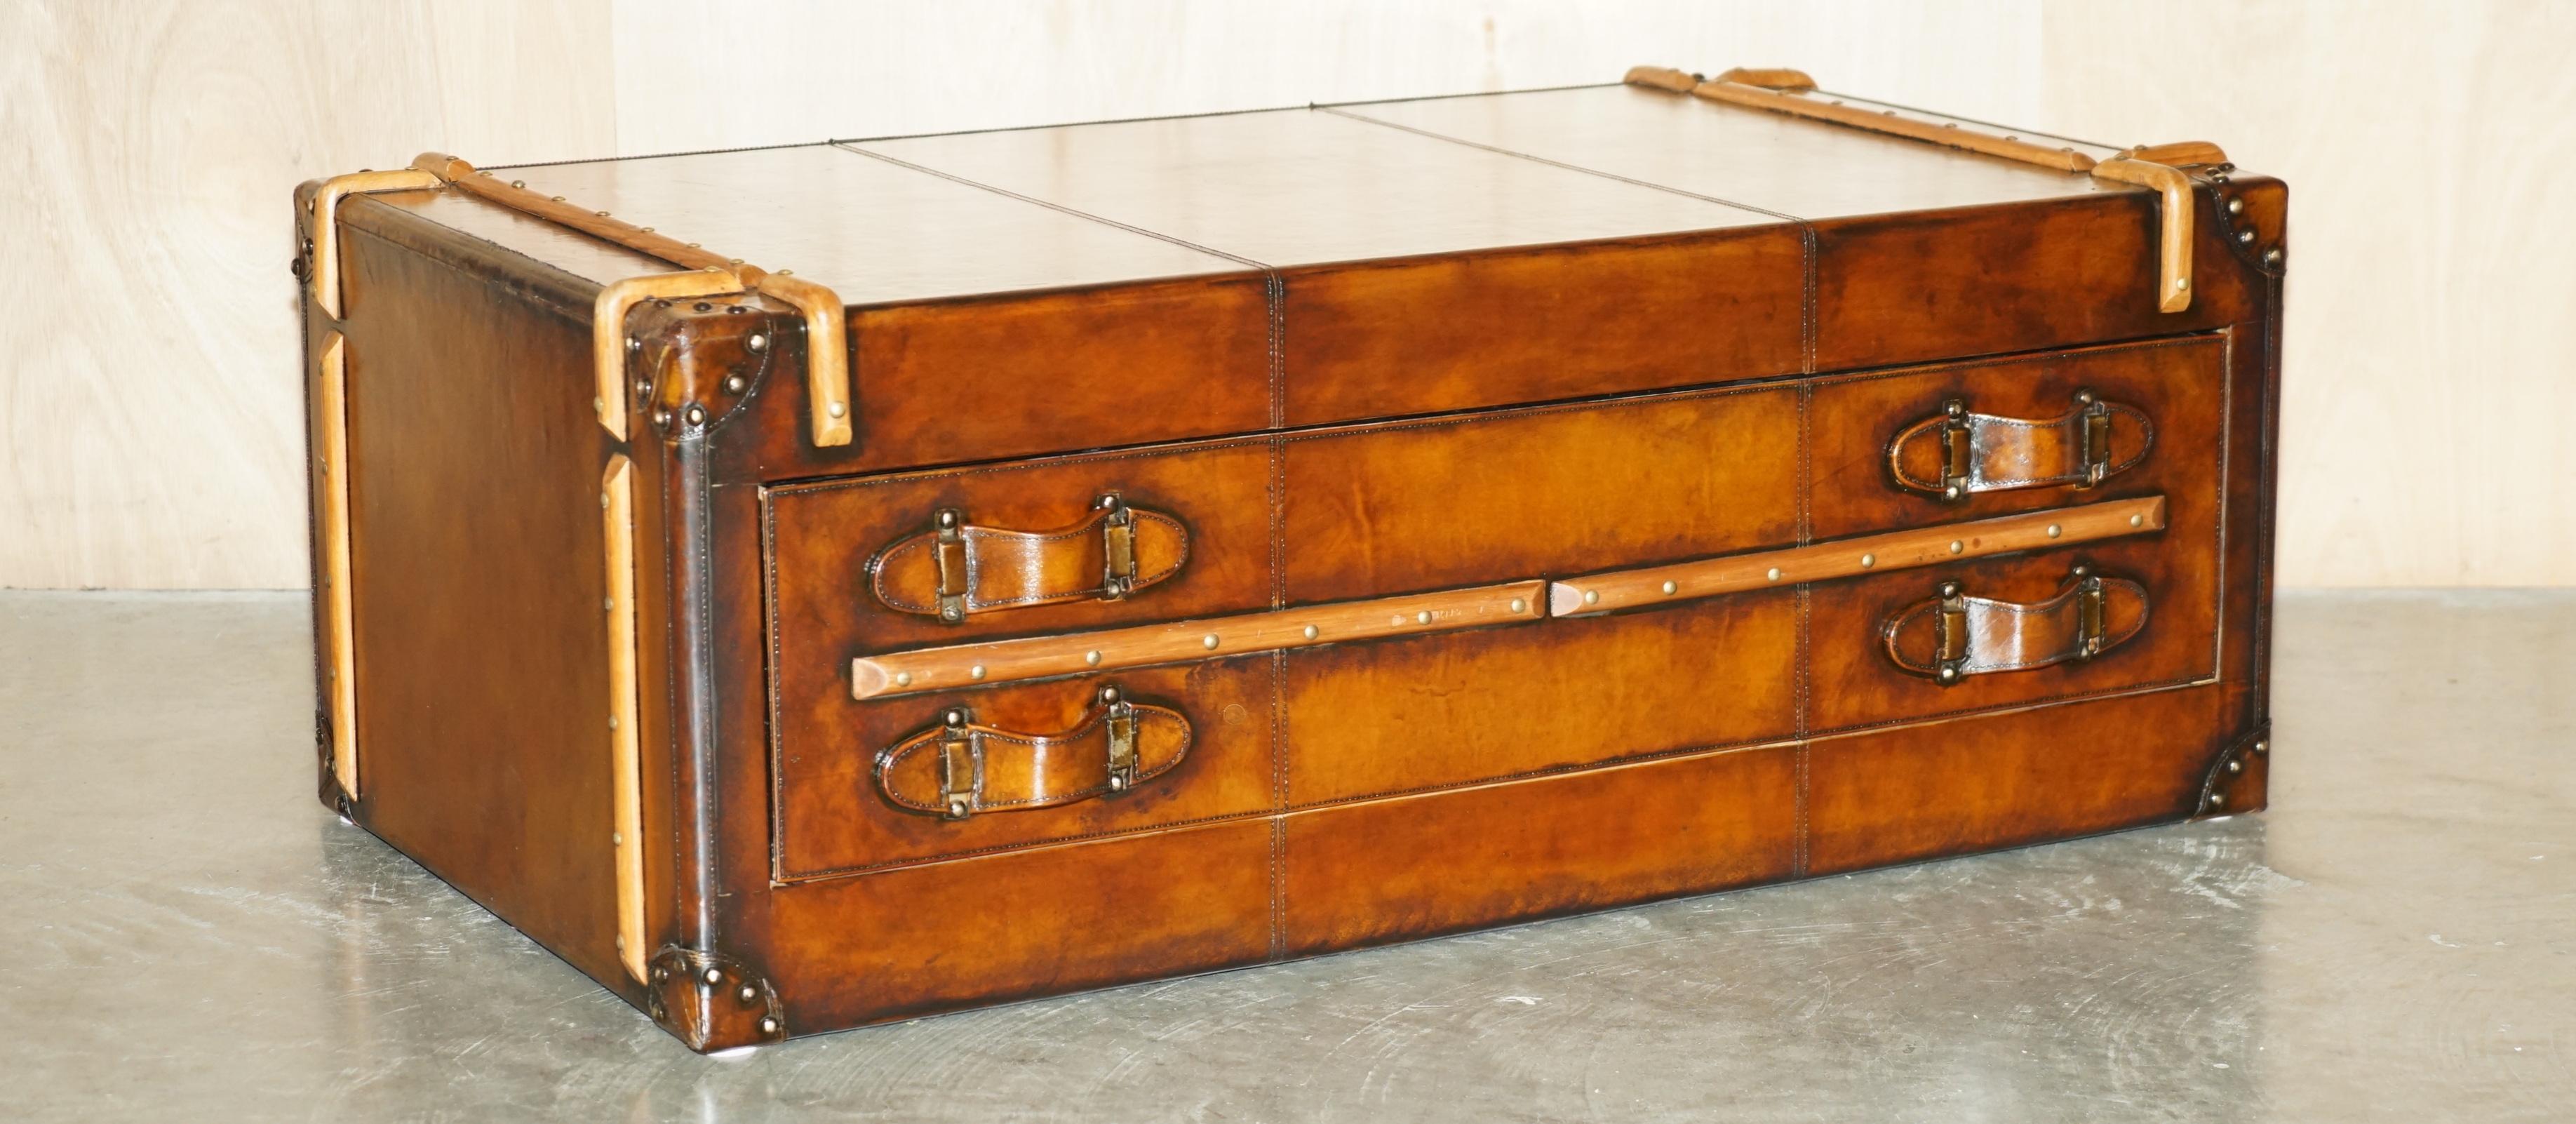 Royal House Antiques

Royal House Antiques is delighted to offer for sale this highly decorative, fully restored, hand dyed cigar brown leather steamer trunk coffee table with one large single drawer ideally suited to a coffee table or tv stand